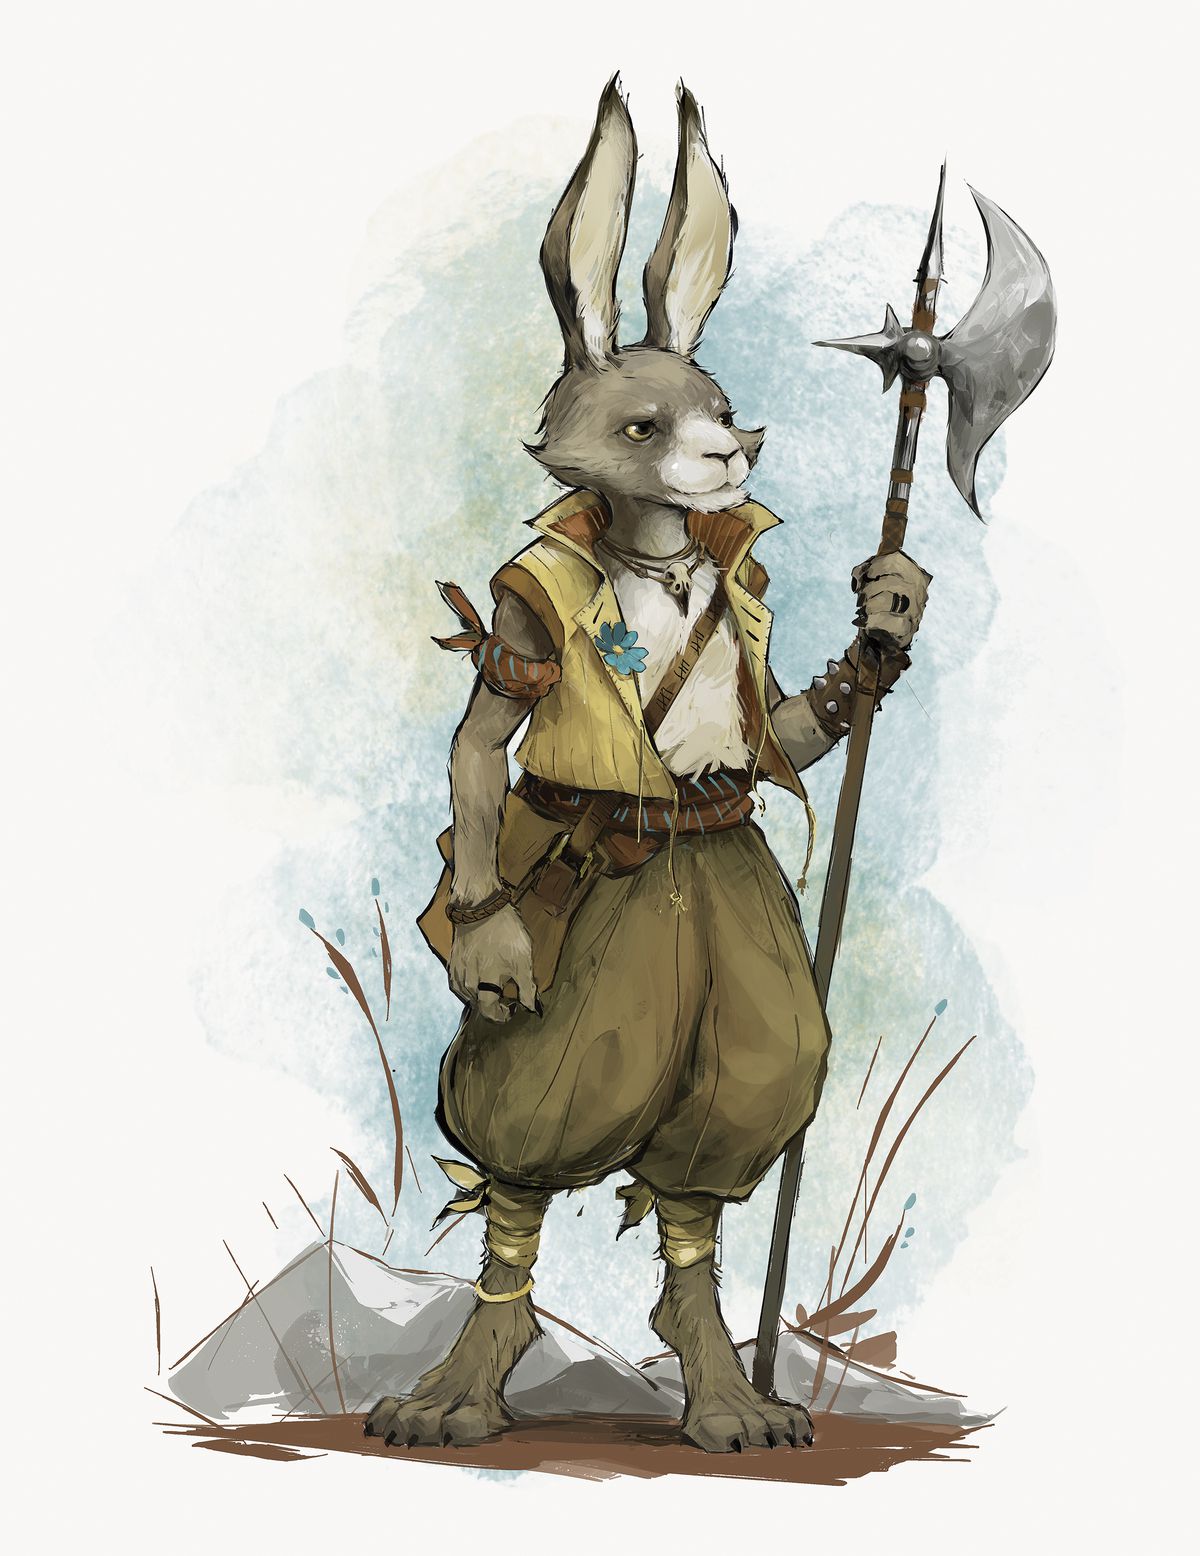 Fantasy illustration of a rabbit wearing britches and holding a halbert